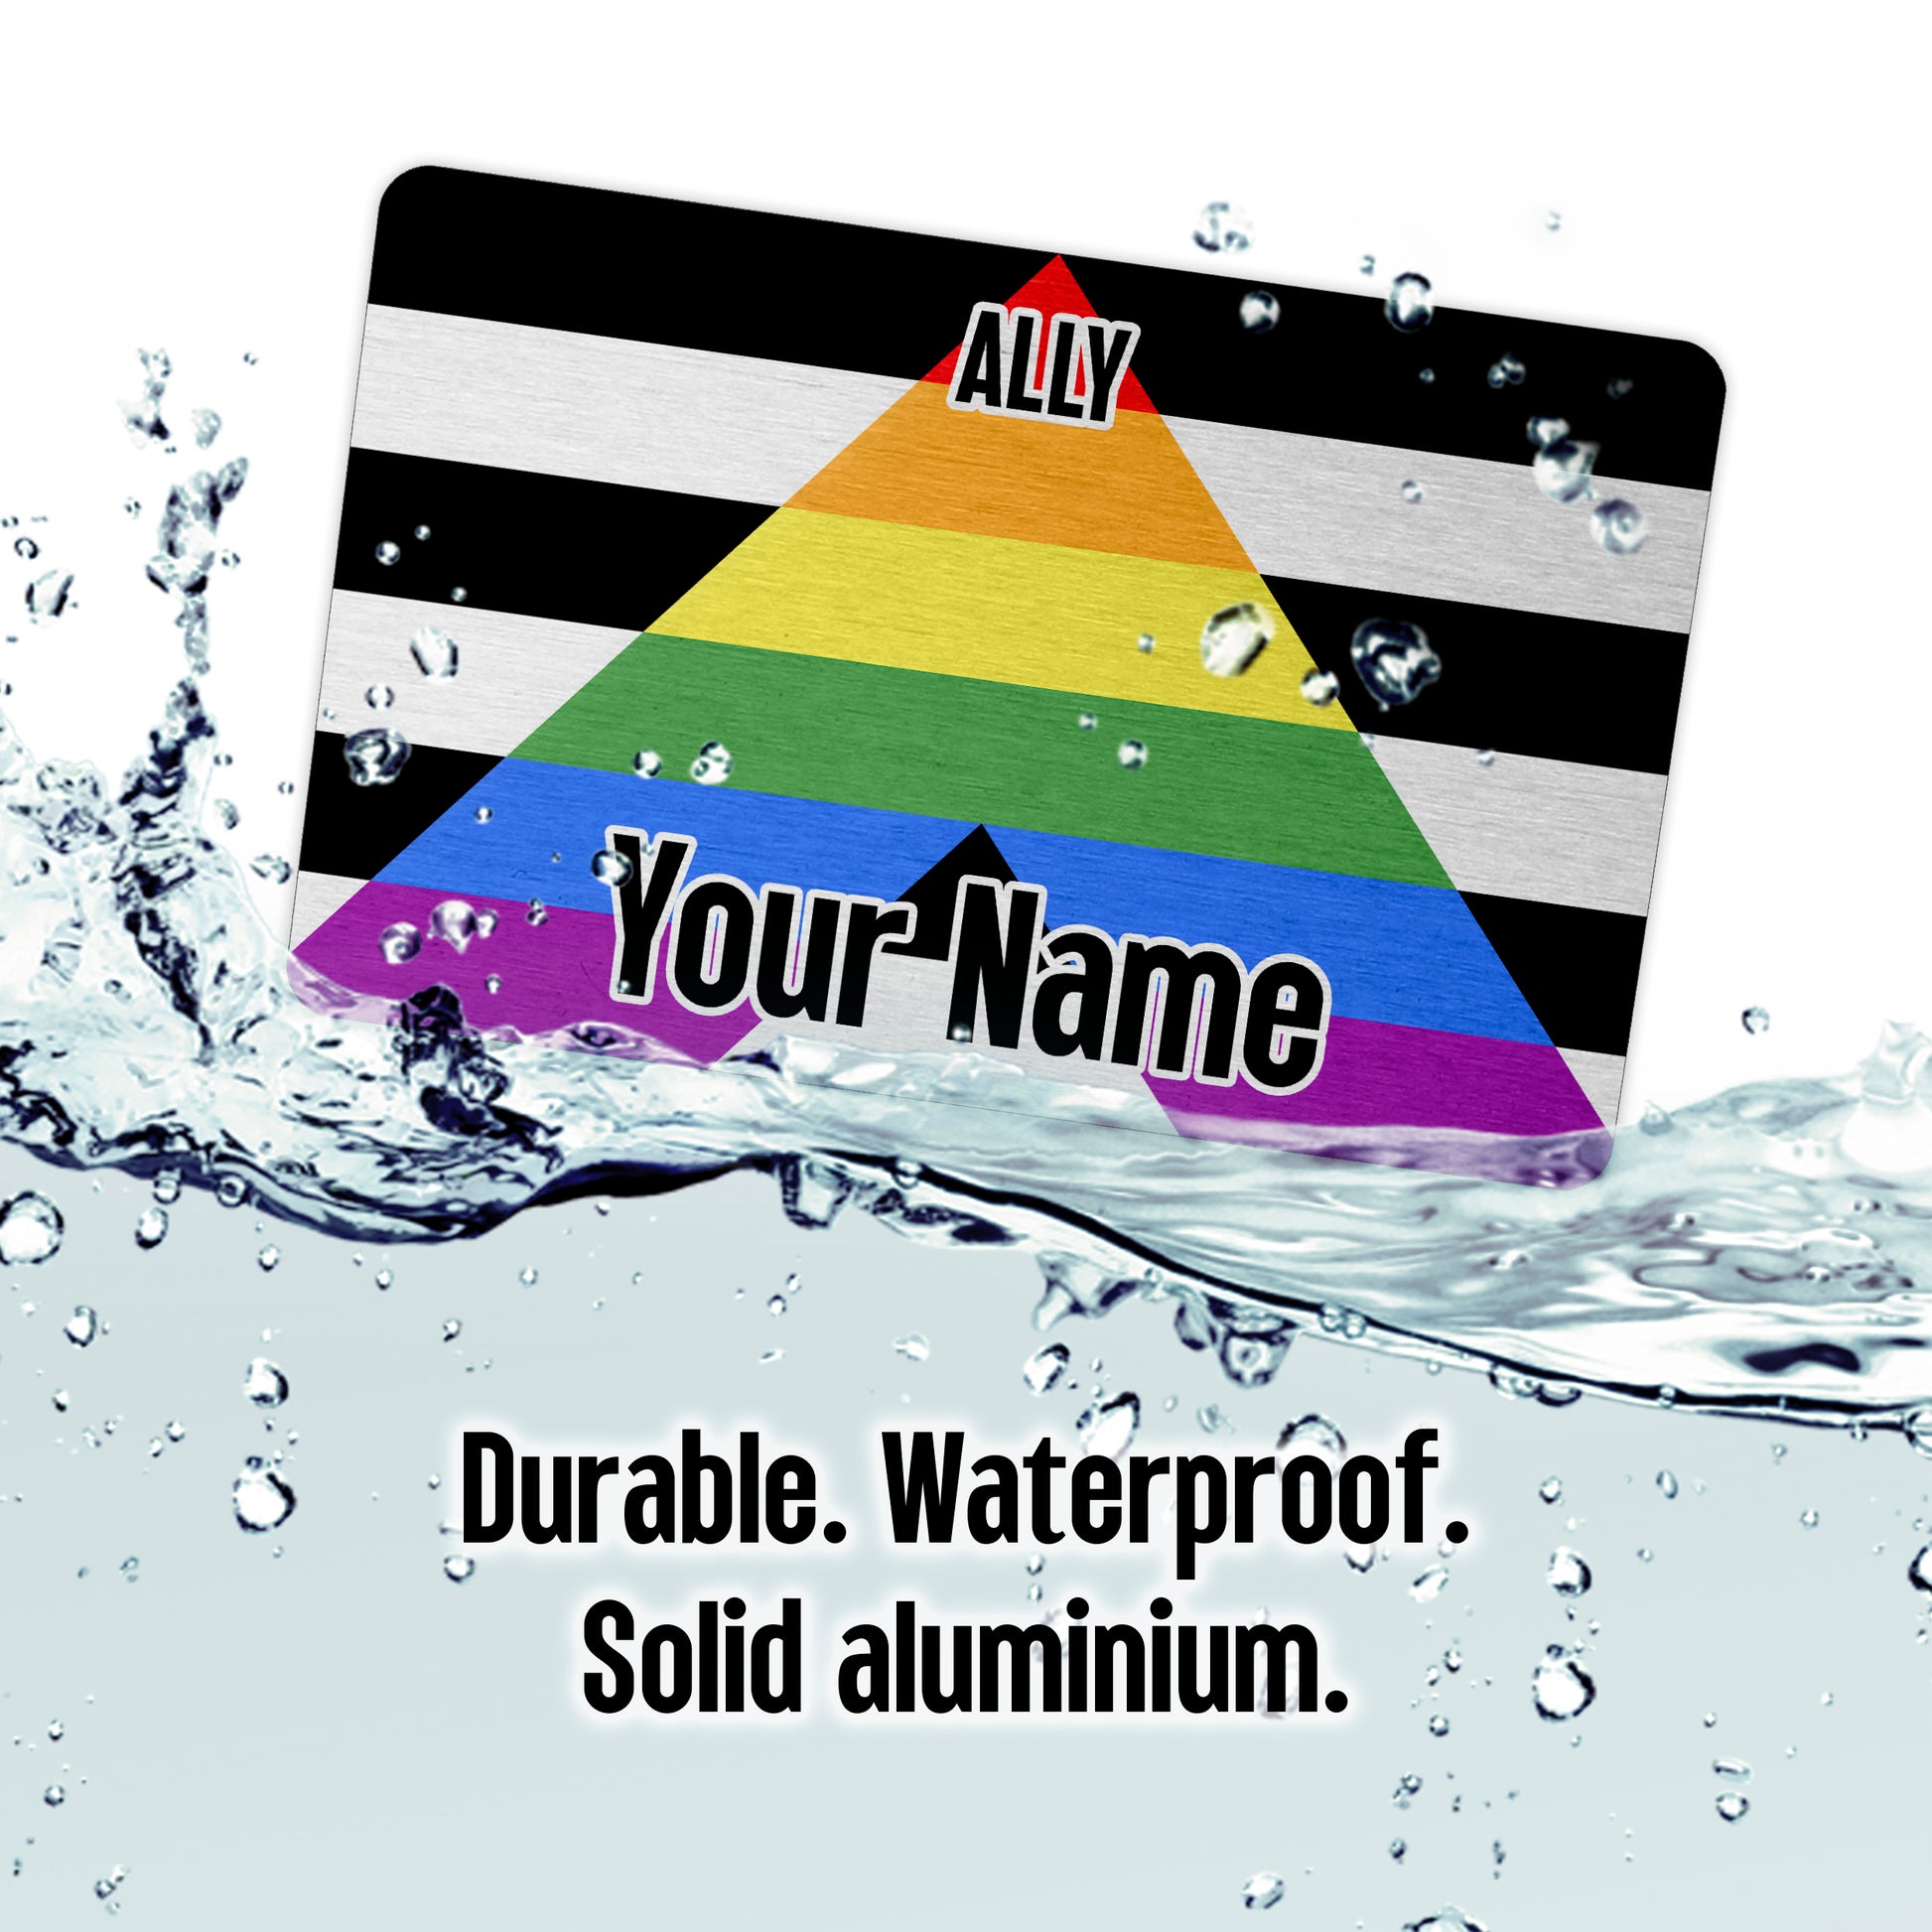 Aluminium wallet card personalised with your name and the ally pride flag